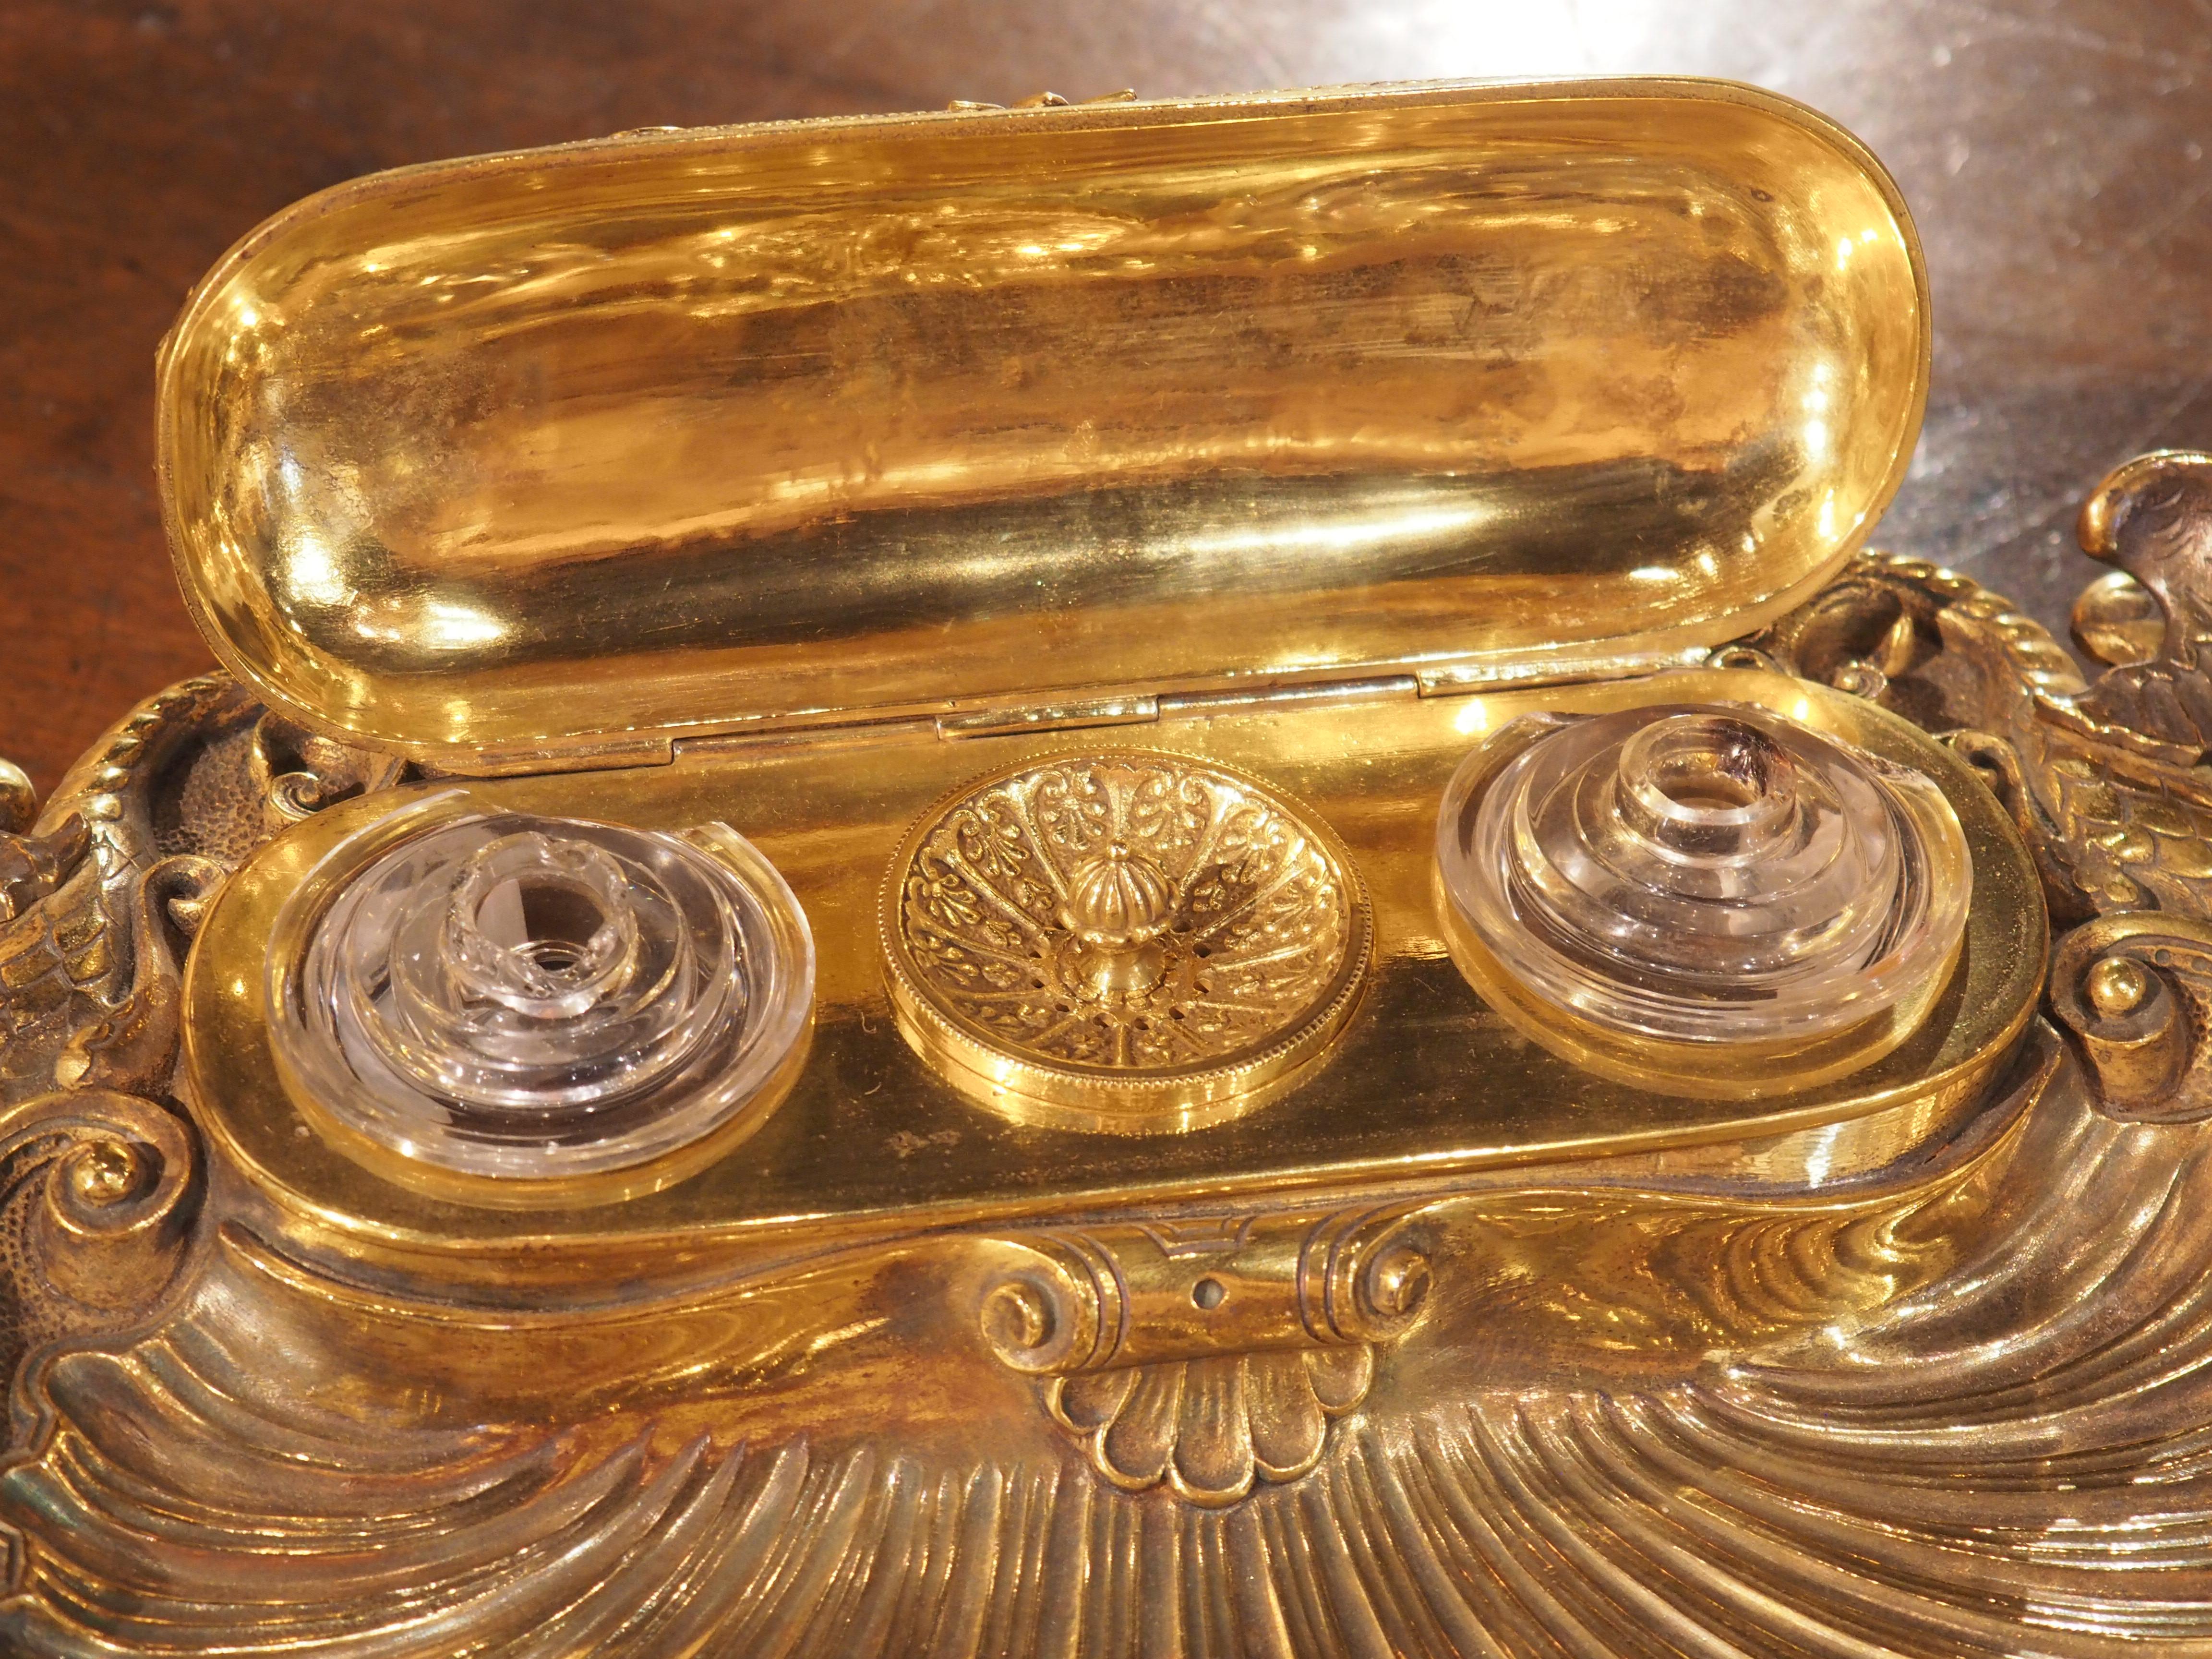 Napoleon III Gilt Bronze Inkwell from France, C. 1840 For Sale 7